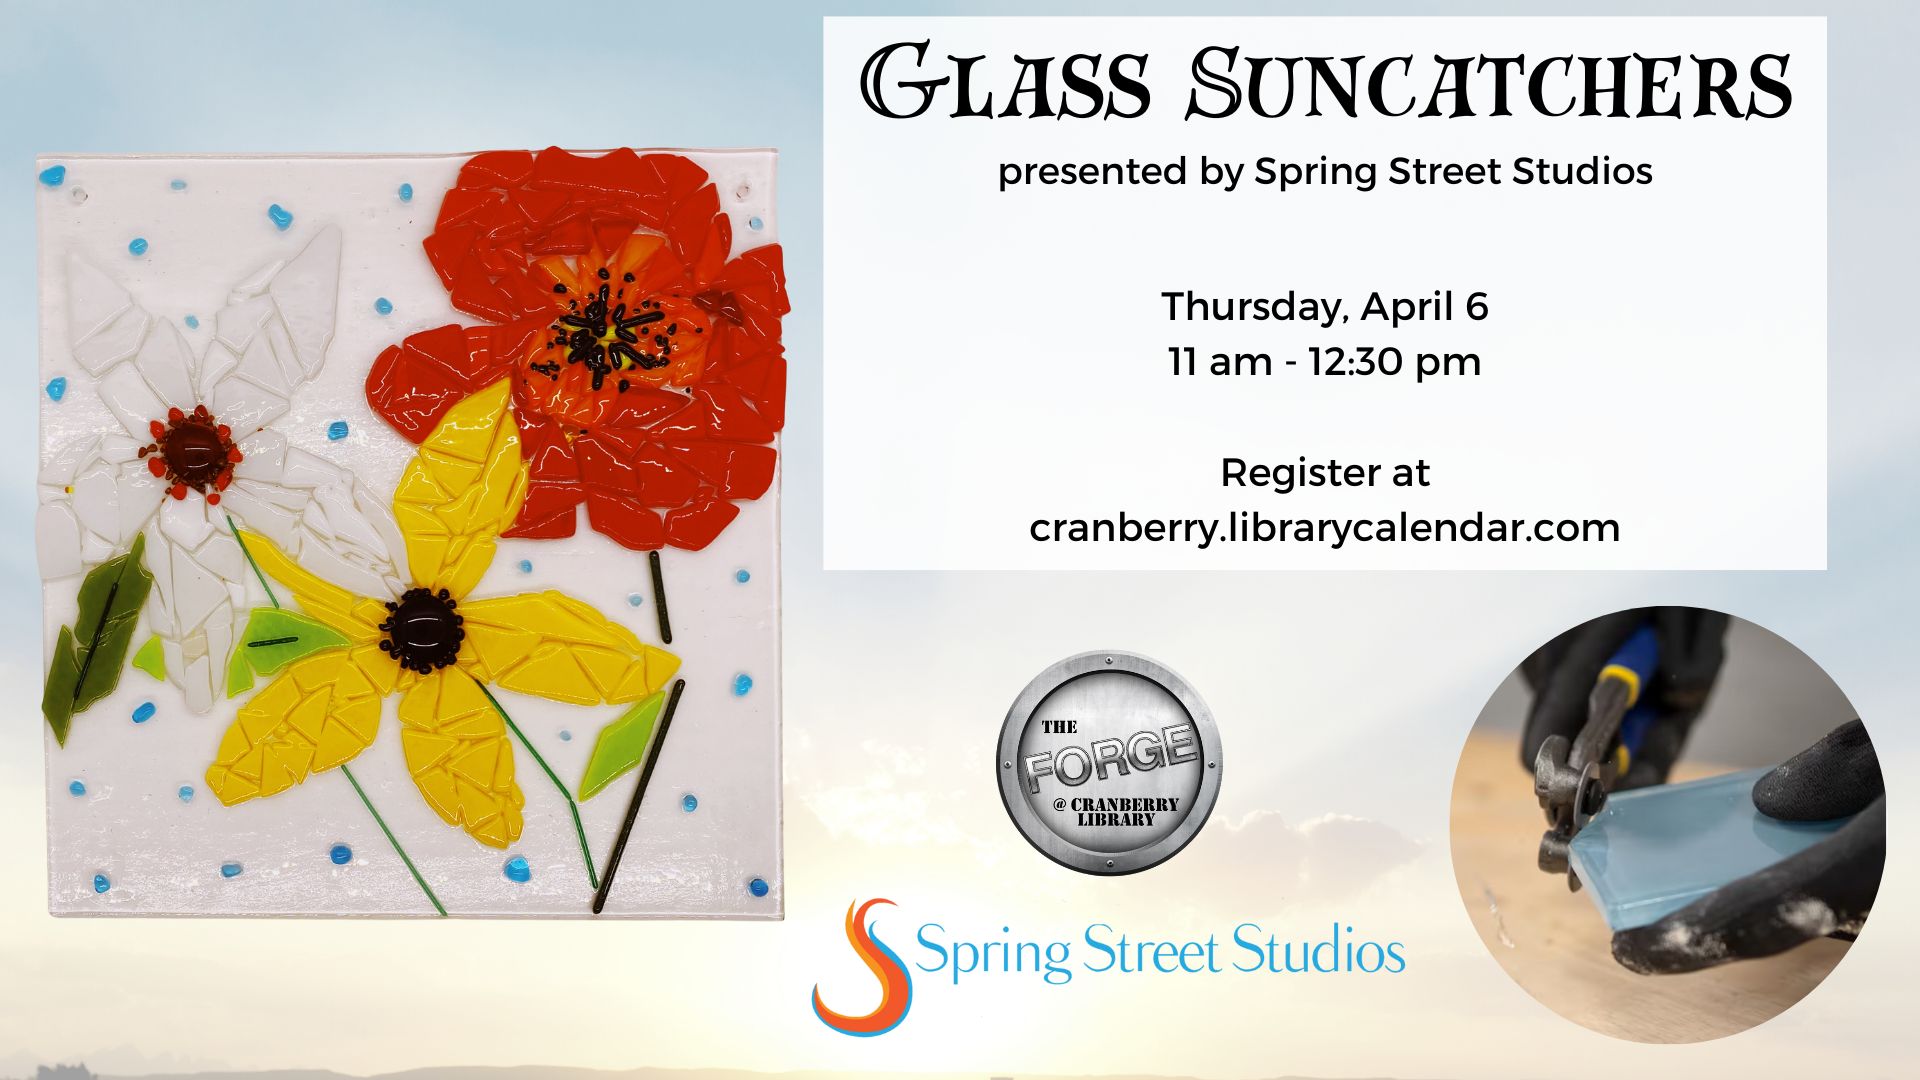 Flyer with an image of a glass suncatcher